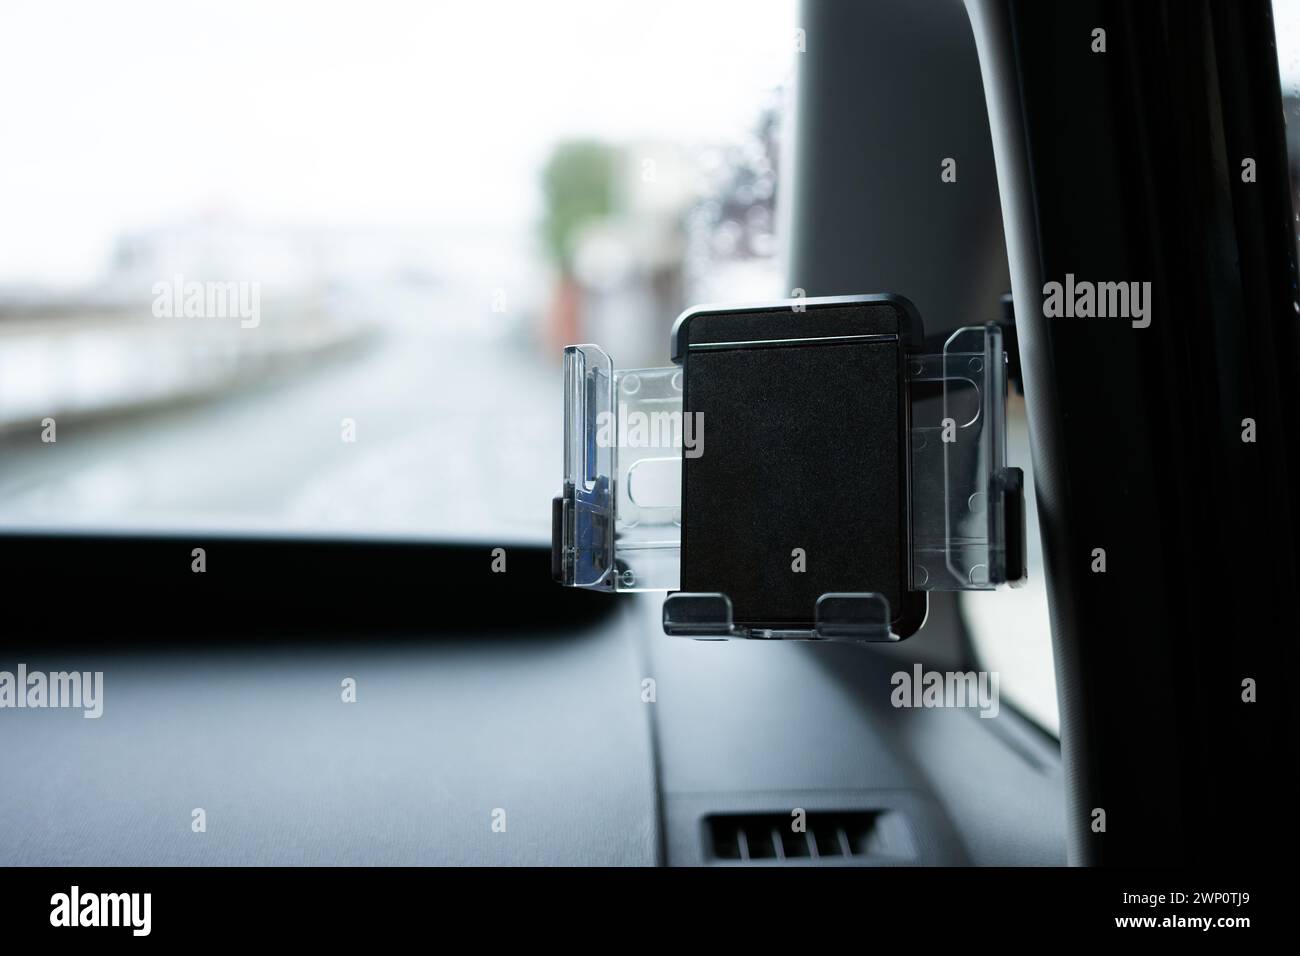 Smartphone car holder installed on the dashboard of a car. Stock Photo